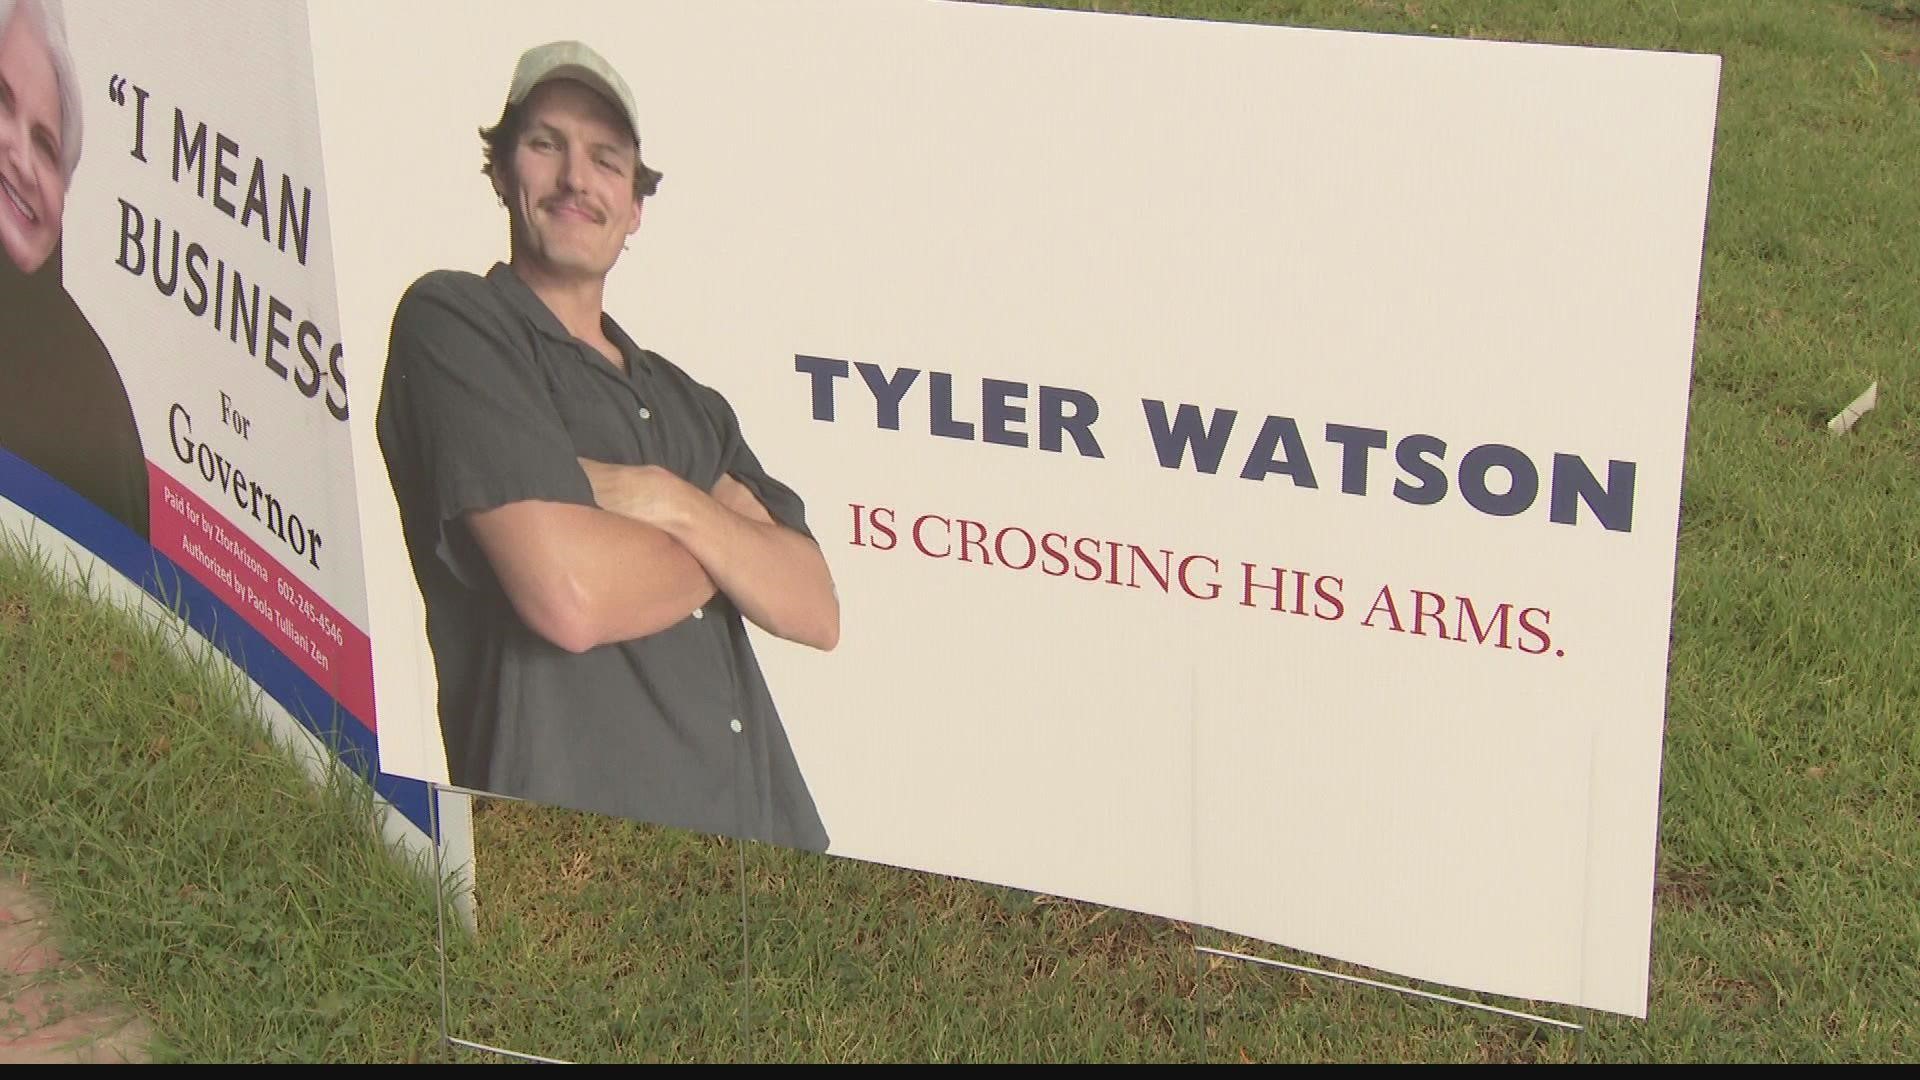 Tyler Watson’s political parody is resonating with thousands of people in the Valley.